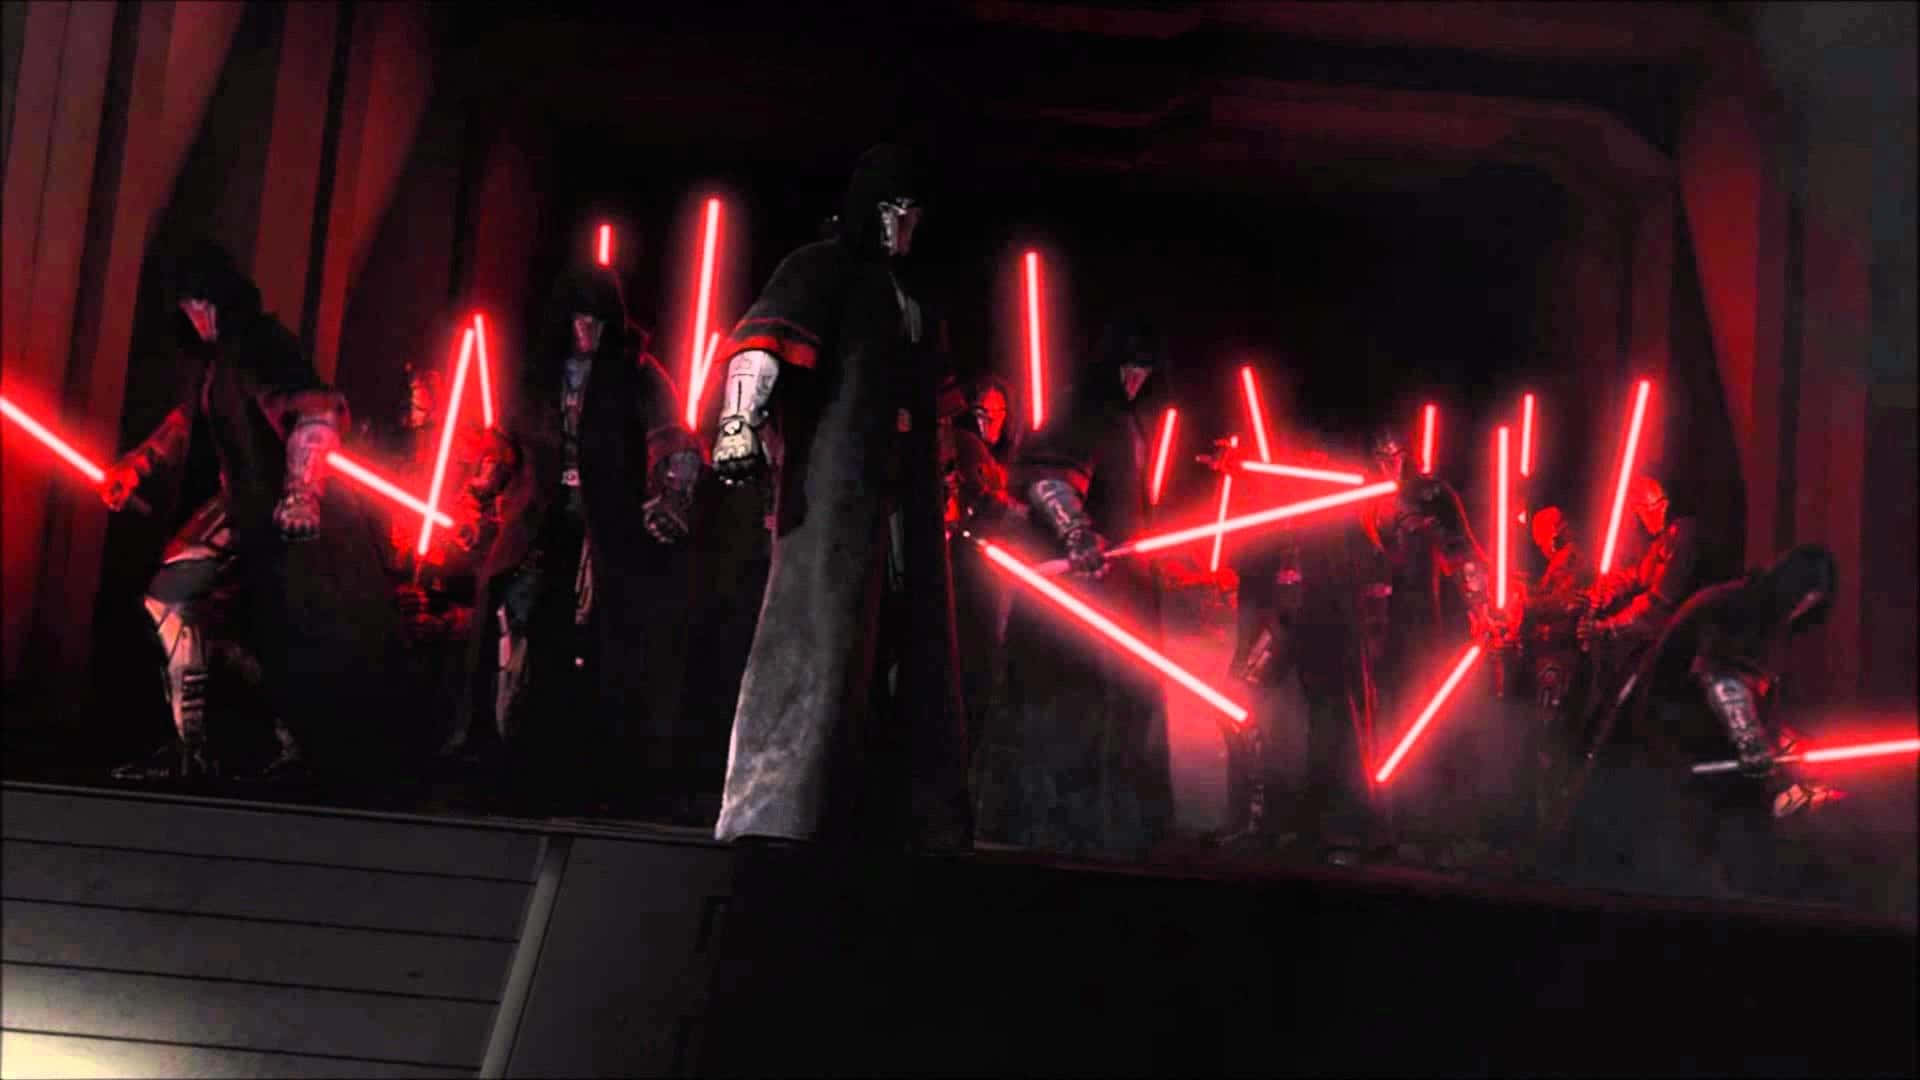 Engage in an Epic Lightsaber Duel Wallpaper